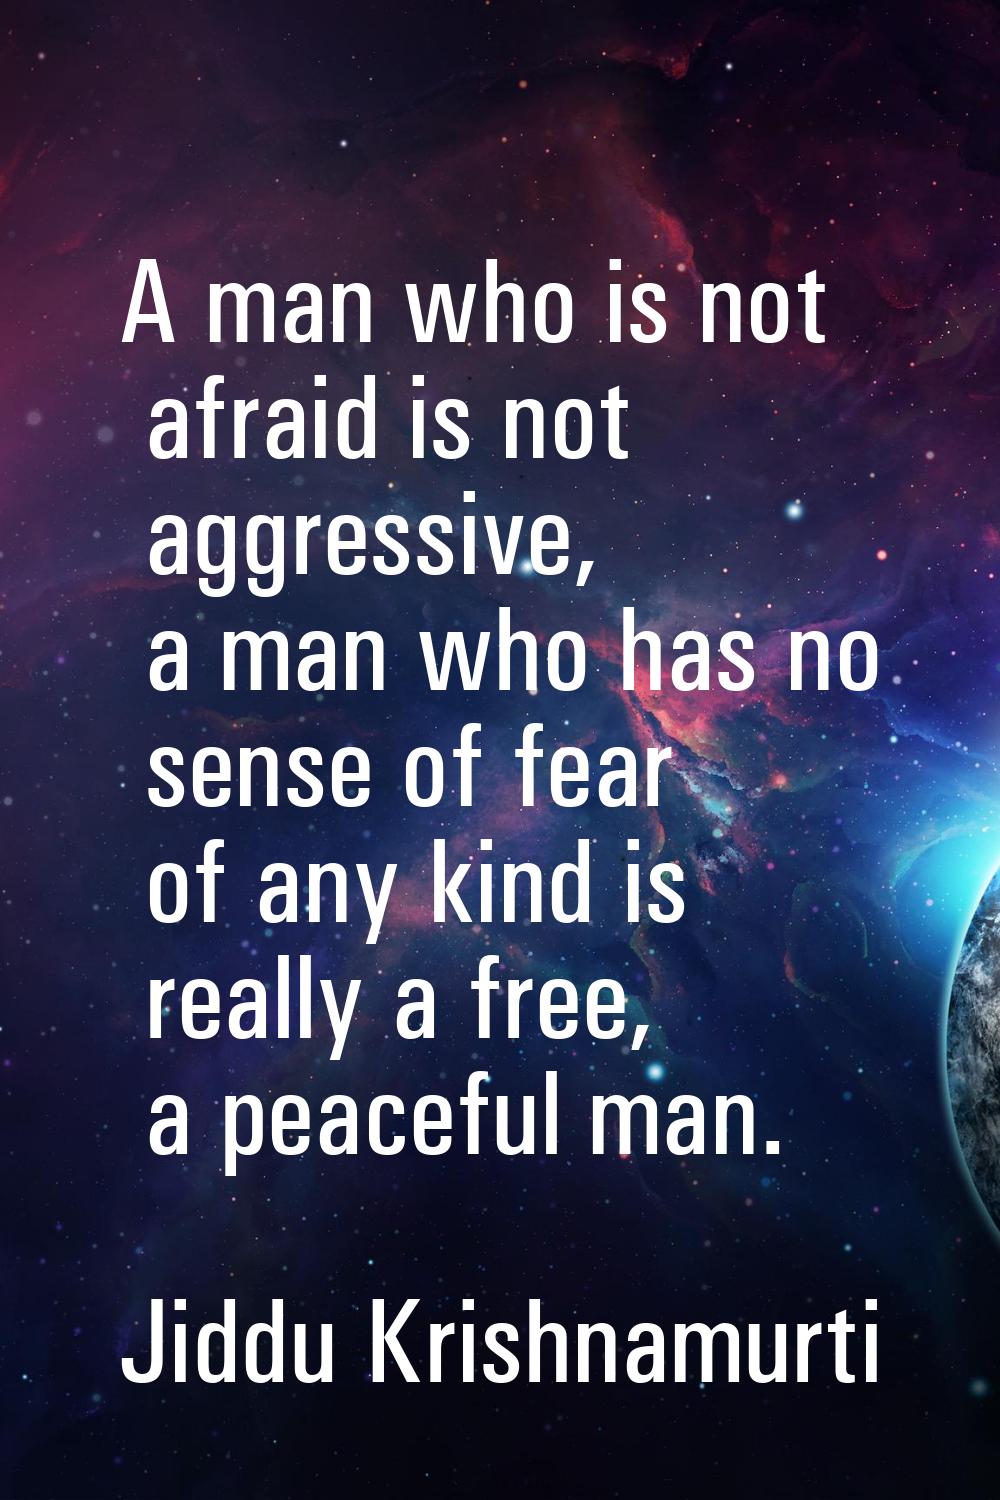 A man who is not afraid is not aggressive, a man who has no sense of fear of any kind is really a f